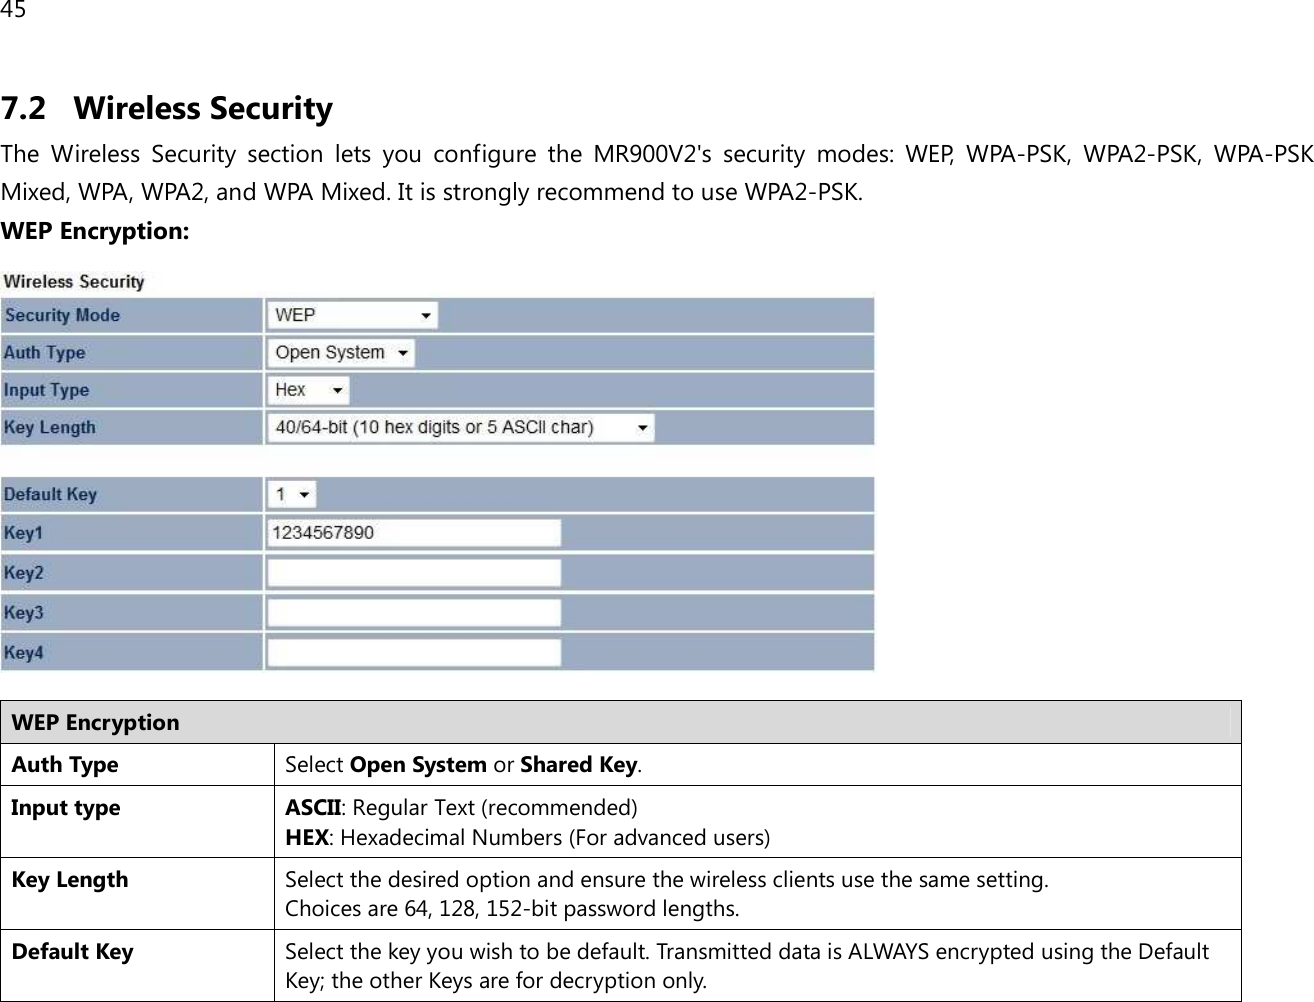 45  7.2 Wireless Security The  Wireless  Security  section  lets  you  configure  the  MR900V2&apos;s  security  modes:  WEP,  WPA-PSK,  WPA2-PSK,  WPA-PSK Mixed, WPA, WPA2, and WPA Mixed. It is strongly recommend to use WPA2-PSK.  WEP Encryption:   WEP Encryption Auth Type Select Open System or Shared Key. Input type ASCII: Regular Text (recommended) HEX: Hexadecimal Numbers (For advanced users) Key Length Select the desired option and ensure the wireless clients use the same setting. Choices are 64, 128, 152-bit password lengths. Default Key Select the key you wish to be default. Transmitted data is ALWAYS encrypted using the Default Key; the other Keys are for decryption only.  